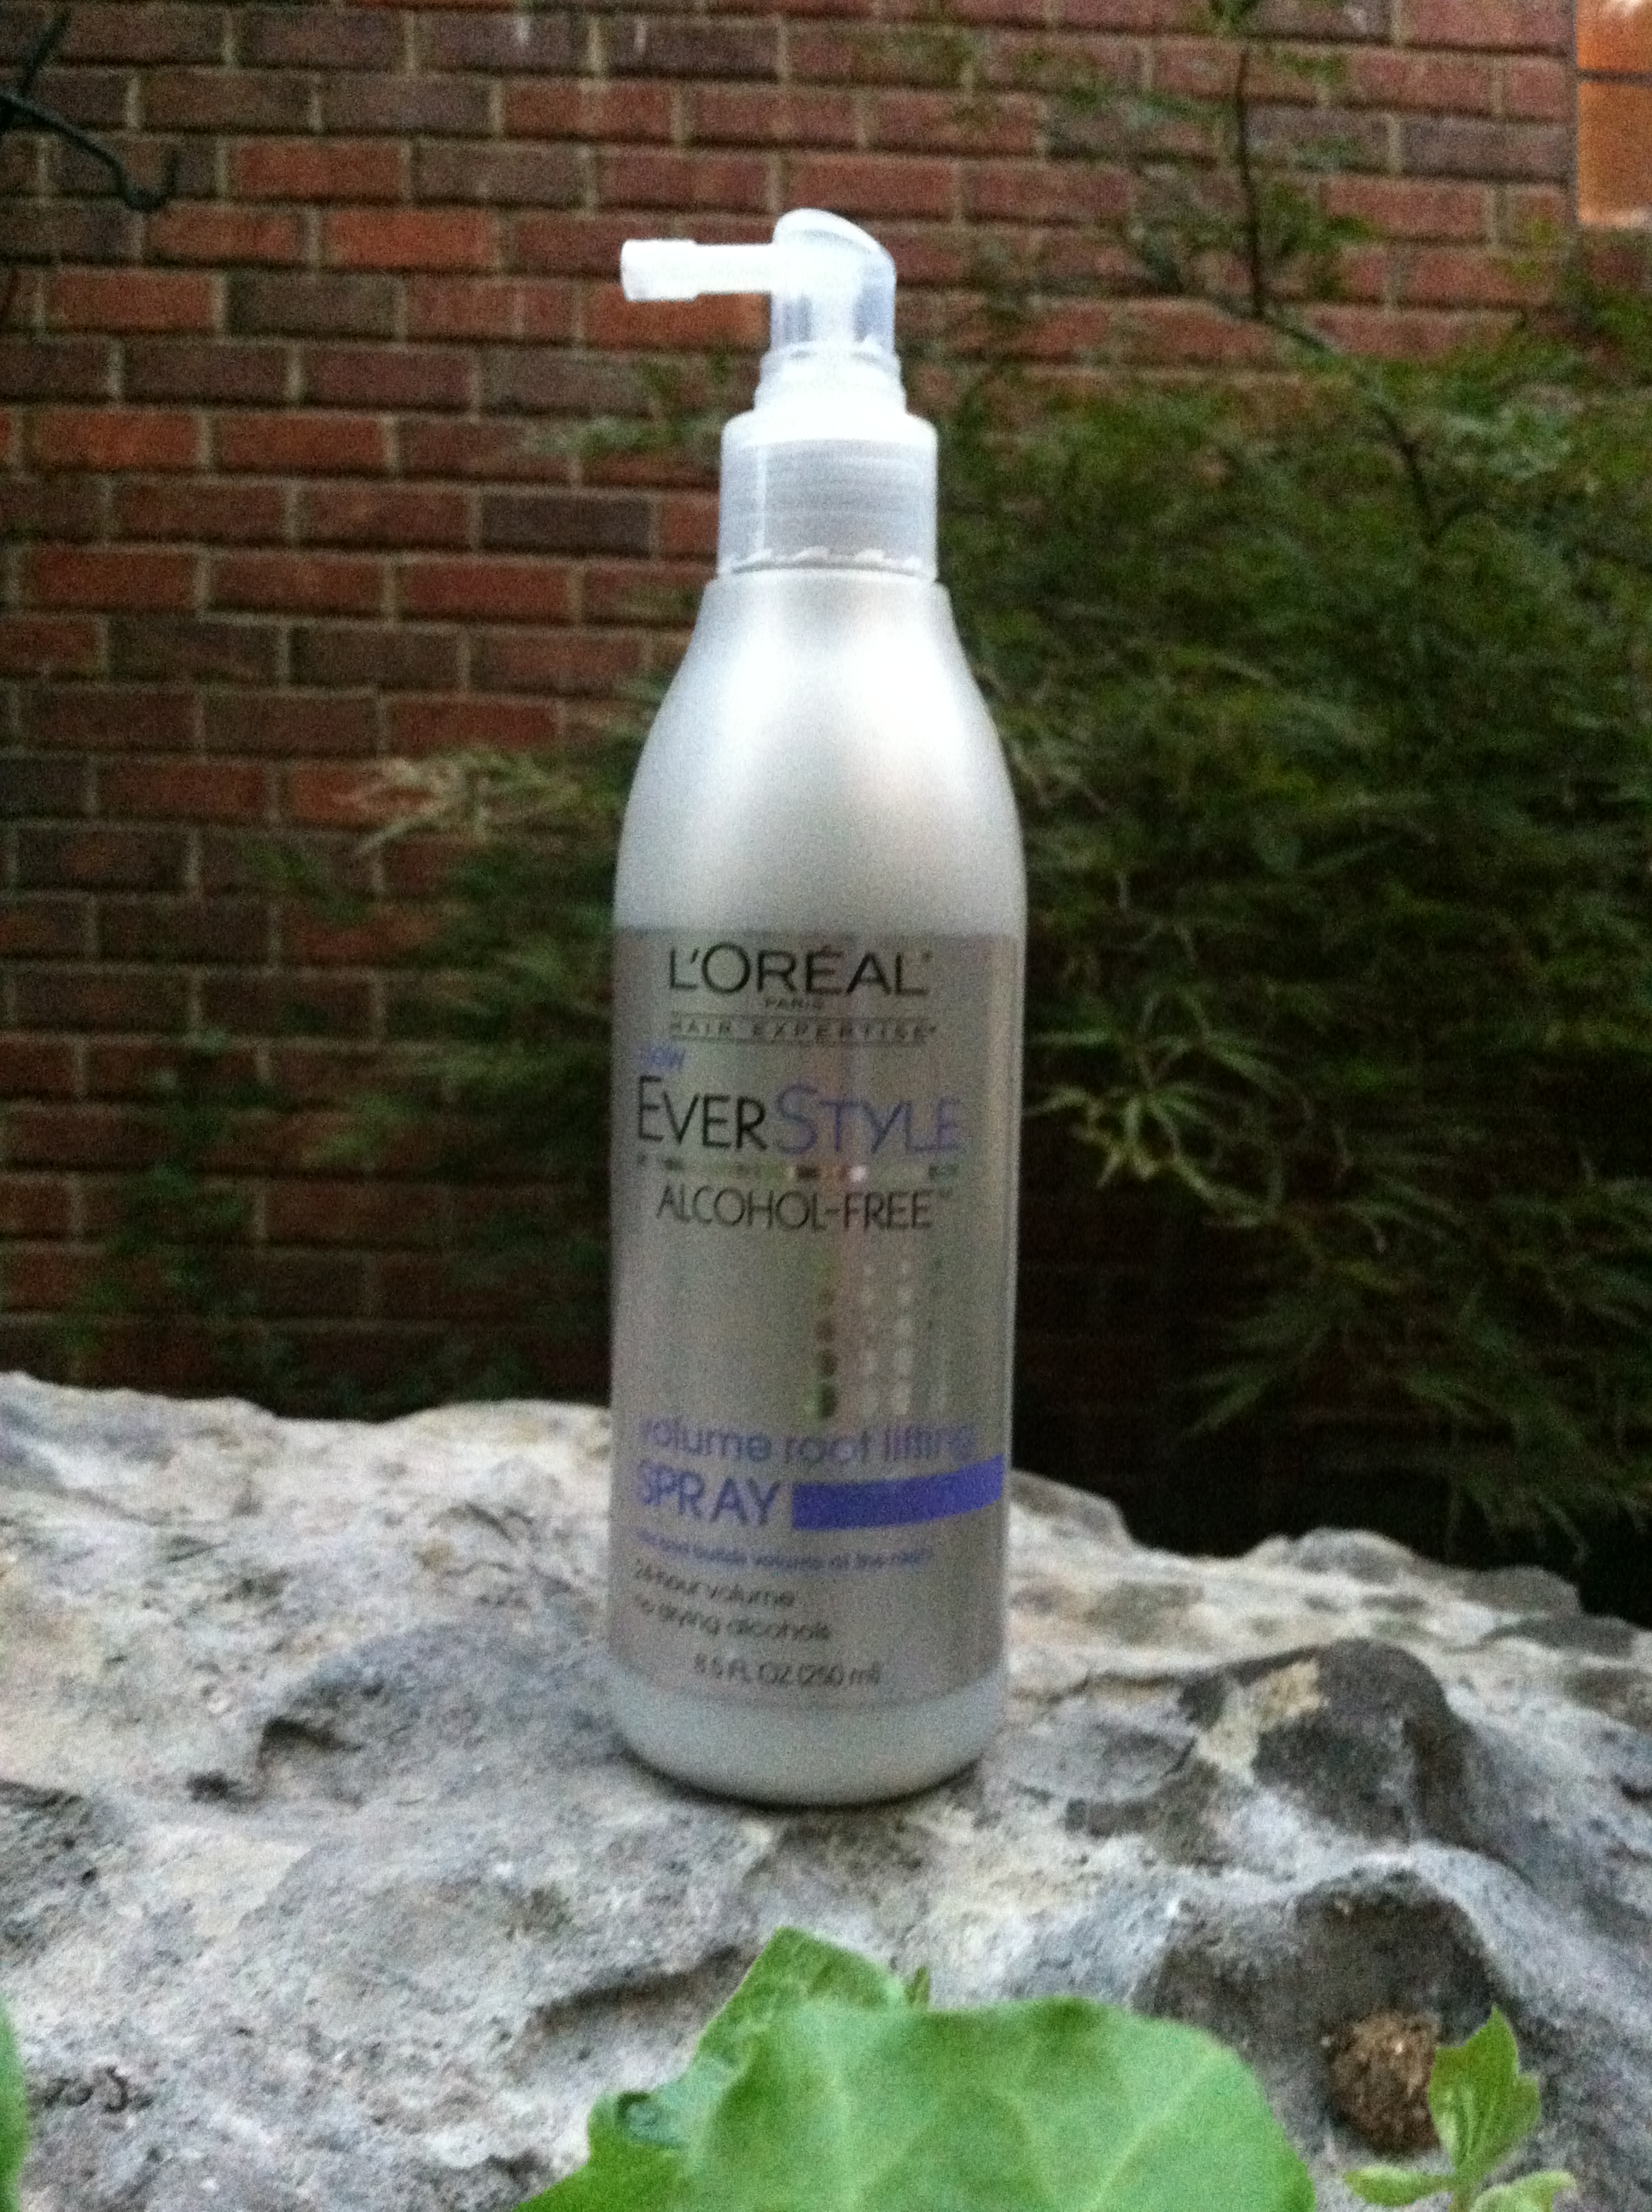 L'Oreal Paris New EverStyle Alcohol Free Root Lifting Spray-$6.99